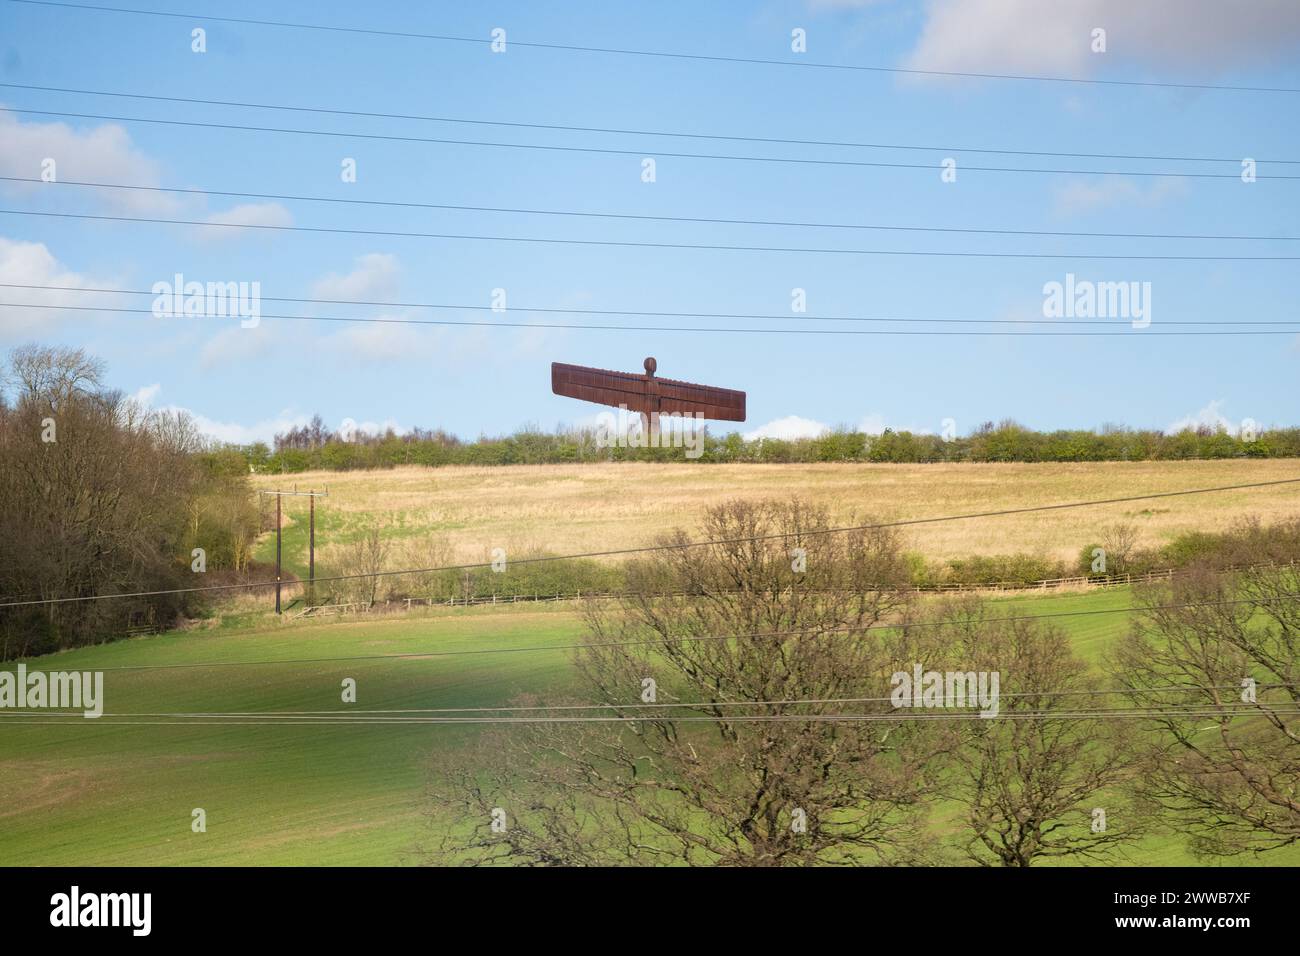 East Coast Main Line - Angel of the North statue viewed from the East Coast Main Line, Gateshead, Tyne and Wear, England, UK Stock Photo